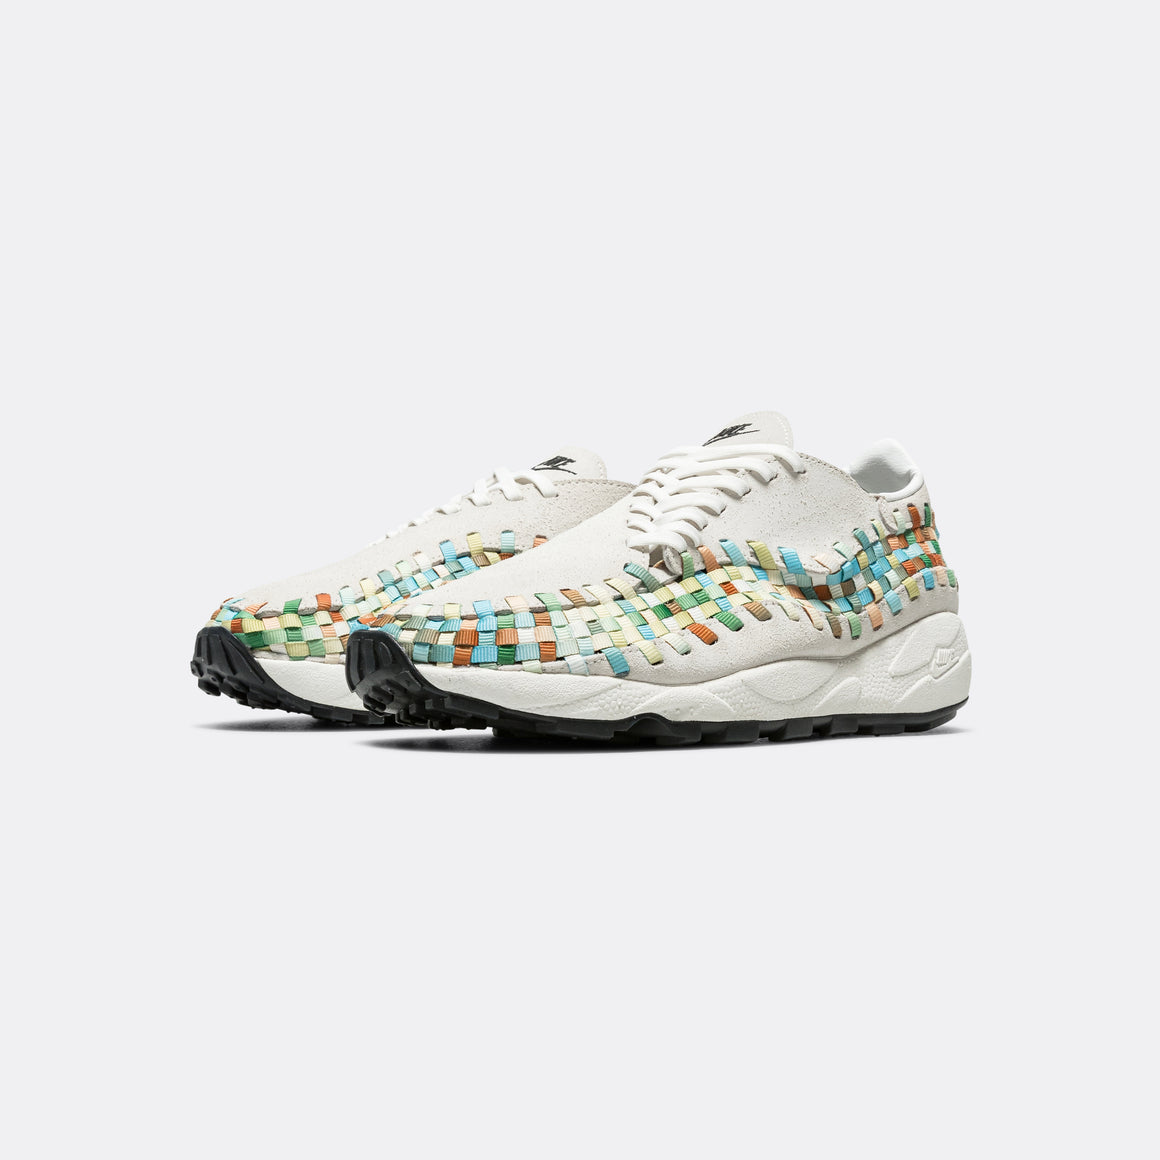 Nike - Womens Air Footscape Woven - Summit White/Black-Sail-Multi-Colour - UP THERE